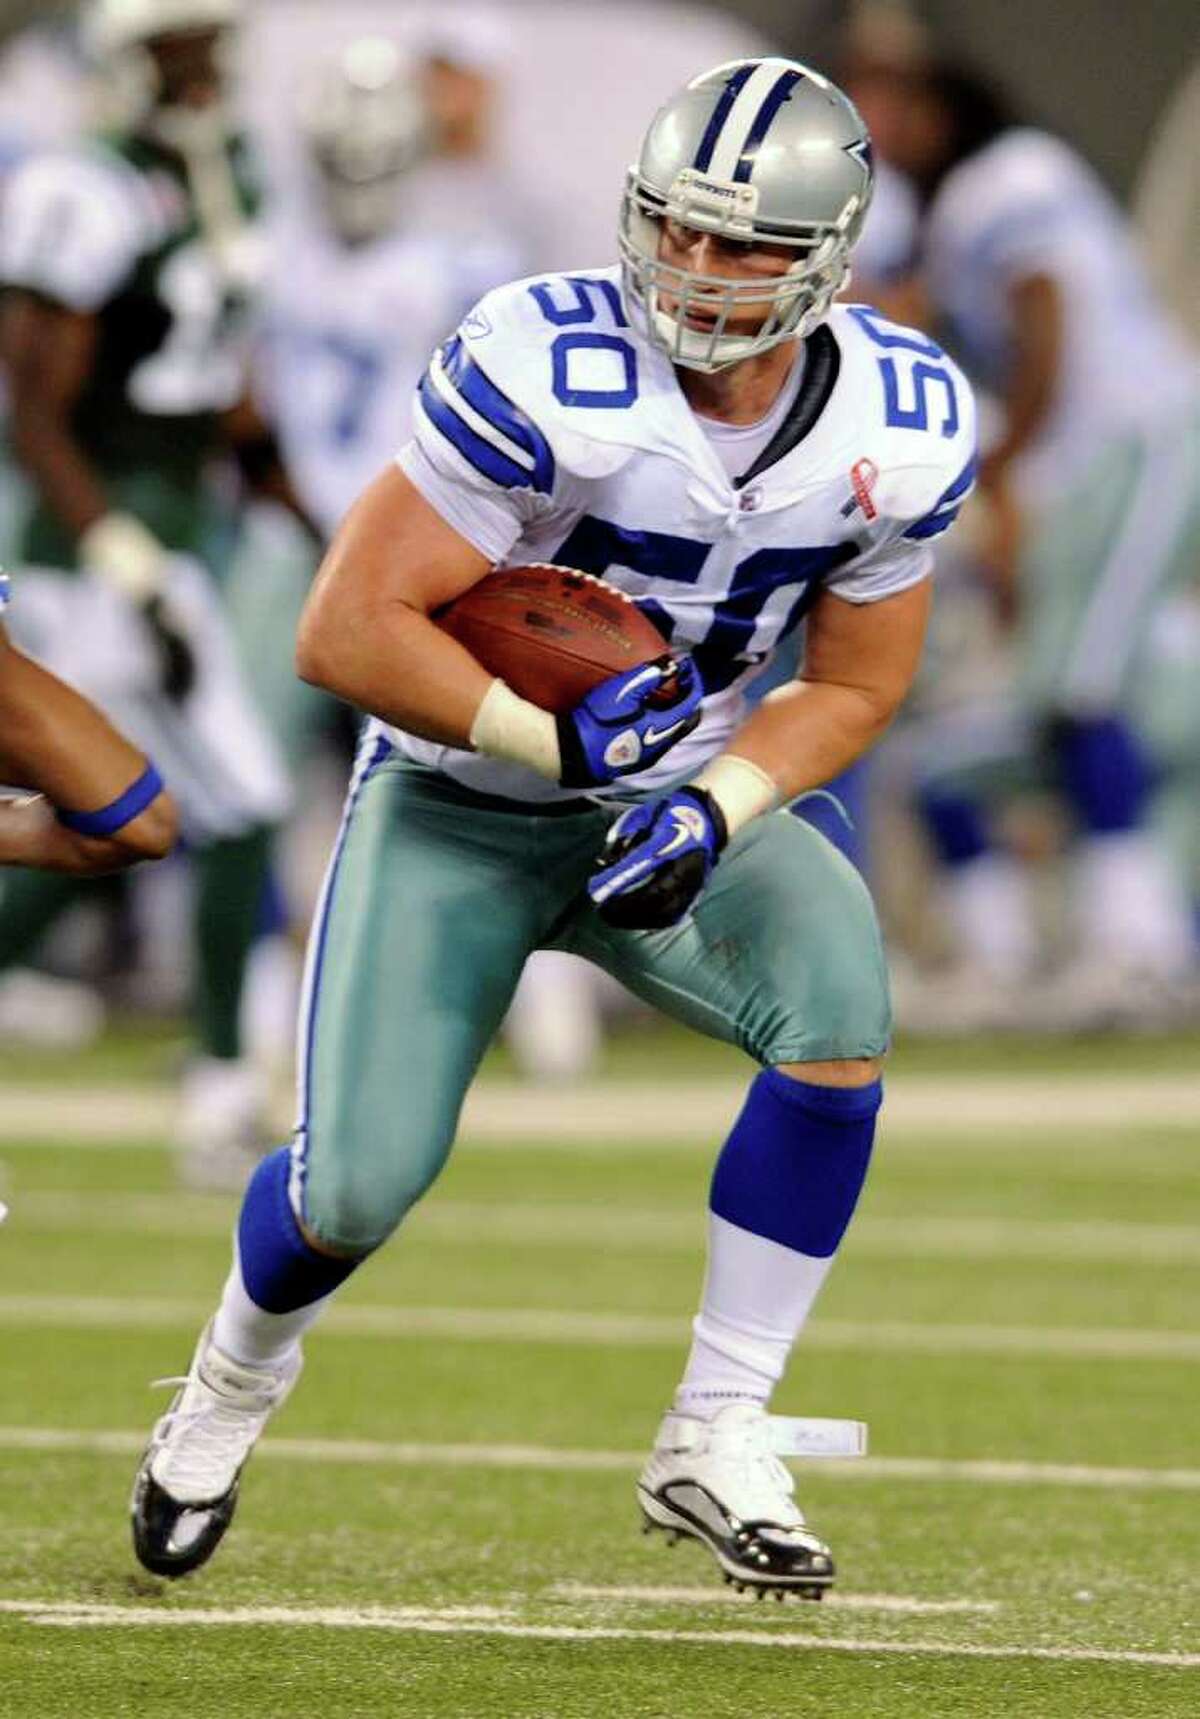 Linebacker Sean Lee almost returned an interception for a touchdown Sunday against the Jets.